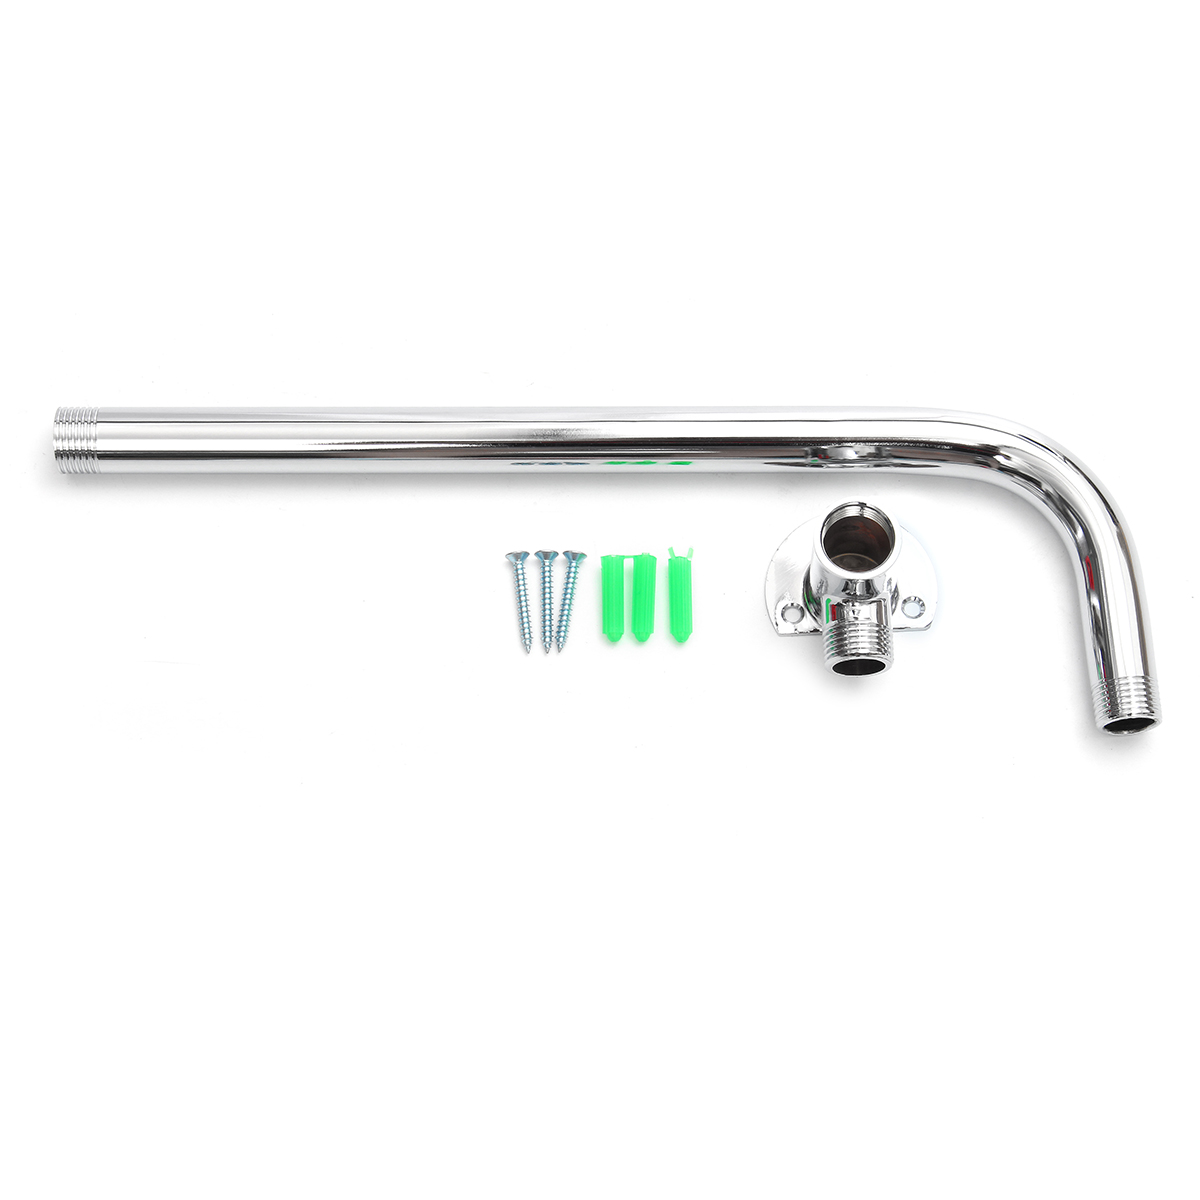 31cm-Bathroom-Chrome-Wall-Mounted-Shower-Extension-Arm-Pipe-Bottom-Entry-for-Rain-Shower-Head-1329398